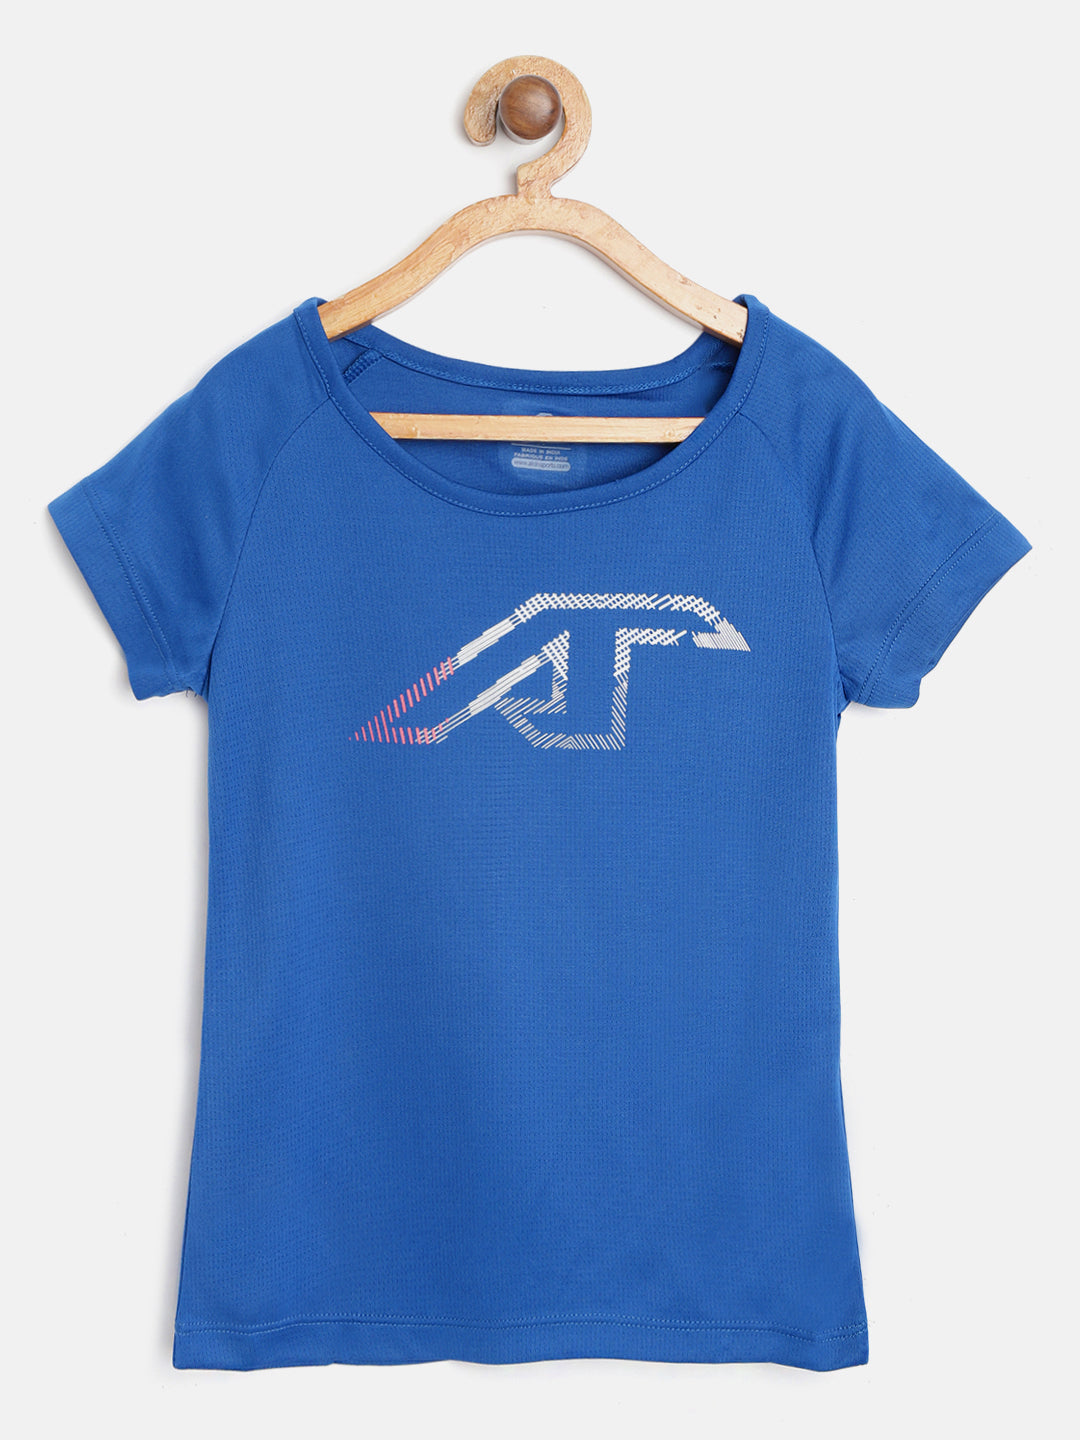 Alcis Girls Solid Turquoise Blue Tshirts